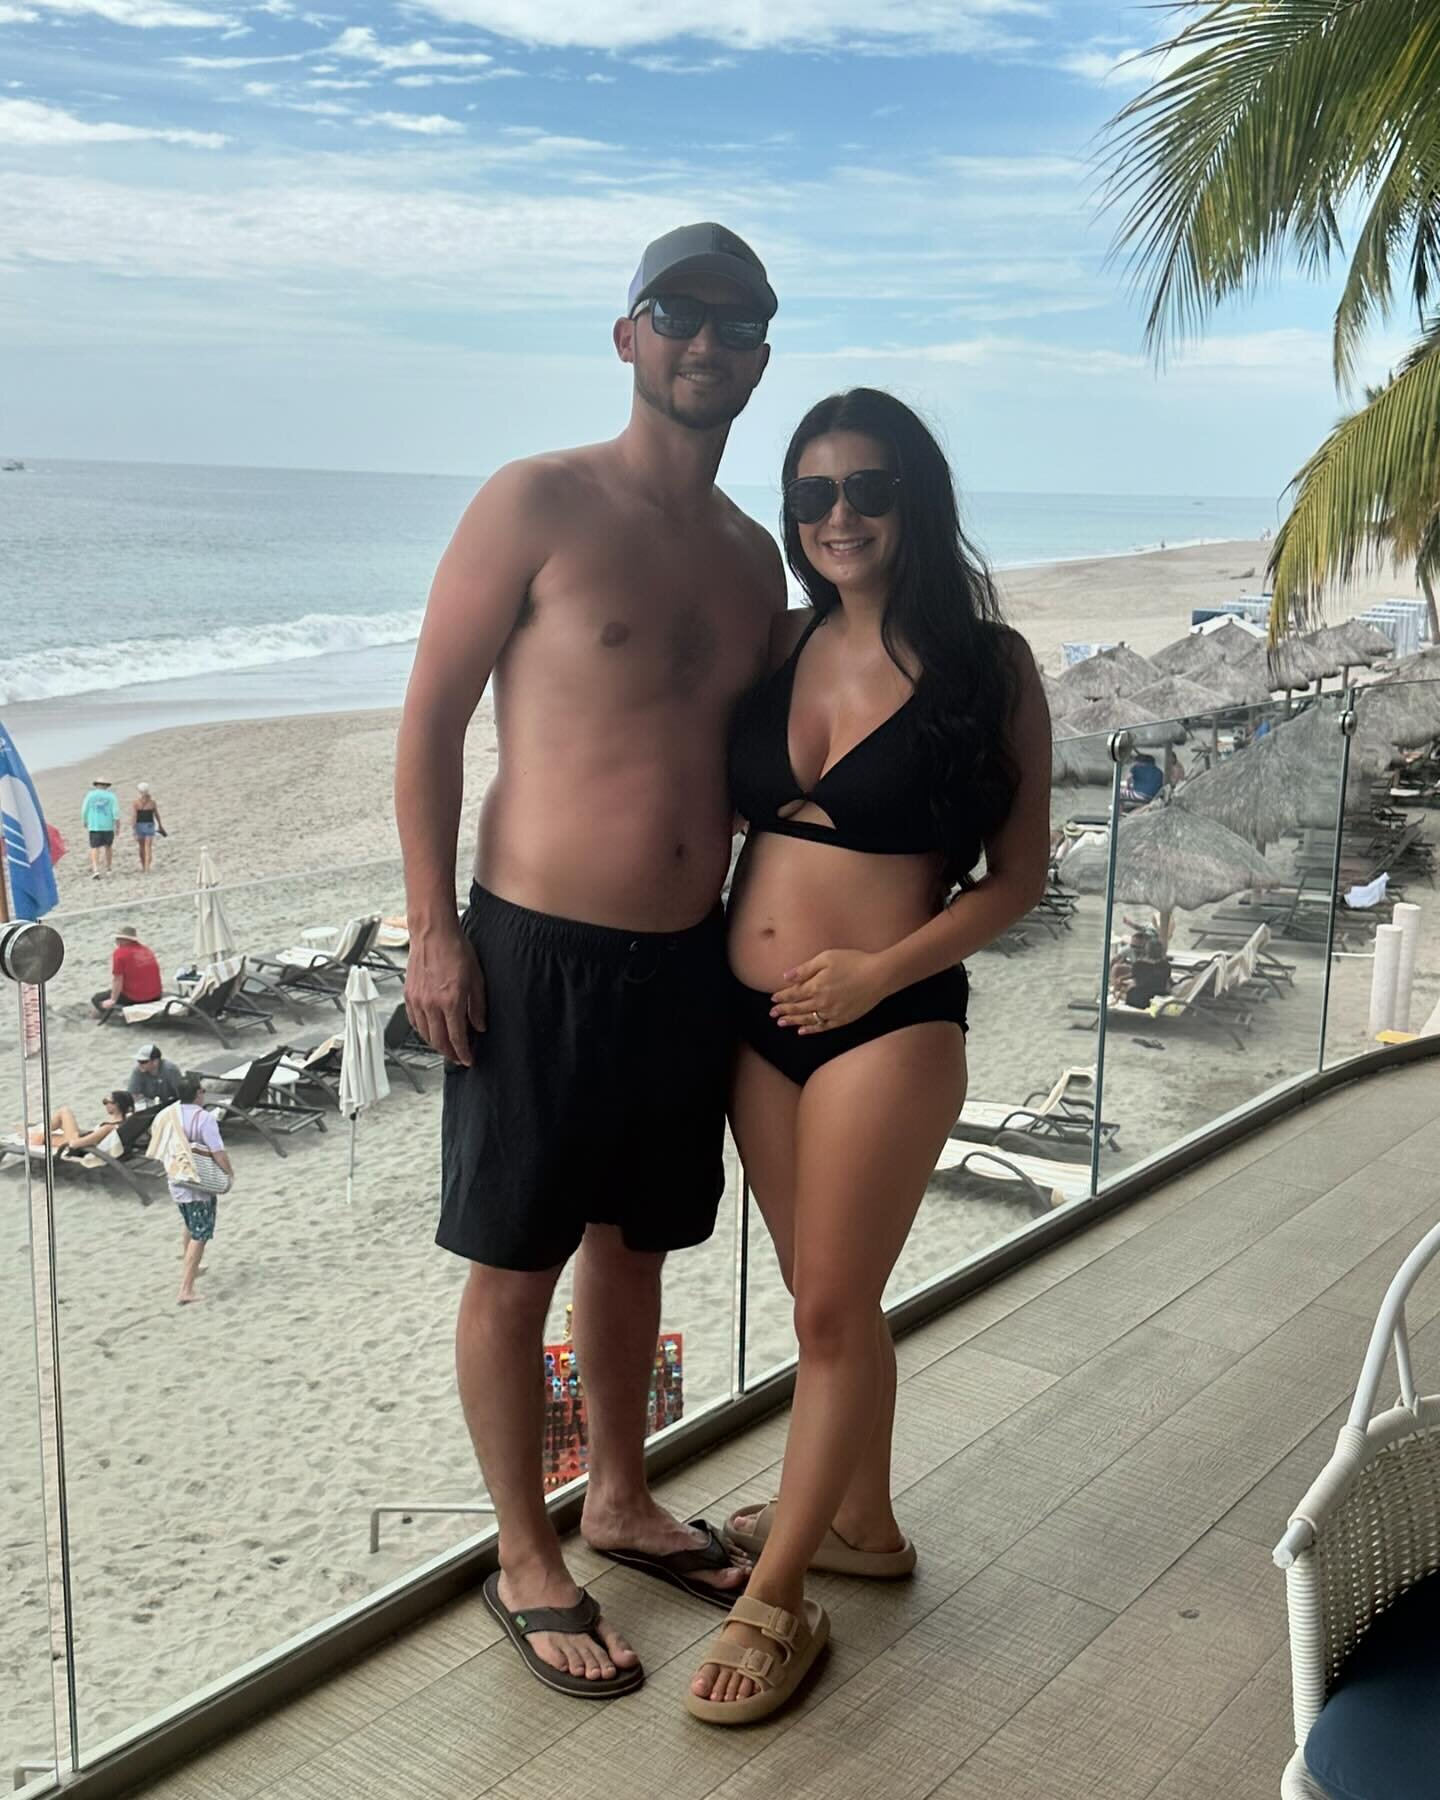 Husband + Wife Puerto Vallarta 2024 🤍🤍🤍
For us, a once a year trip, just the two of us, is a necessity. Our daughter is the focus of our life (as she should be) each and every day, but for these few days, we get the opportunity to really focus on 